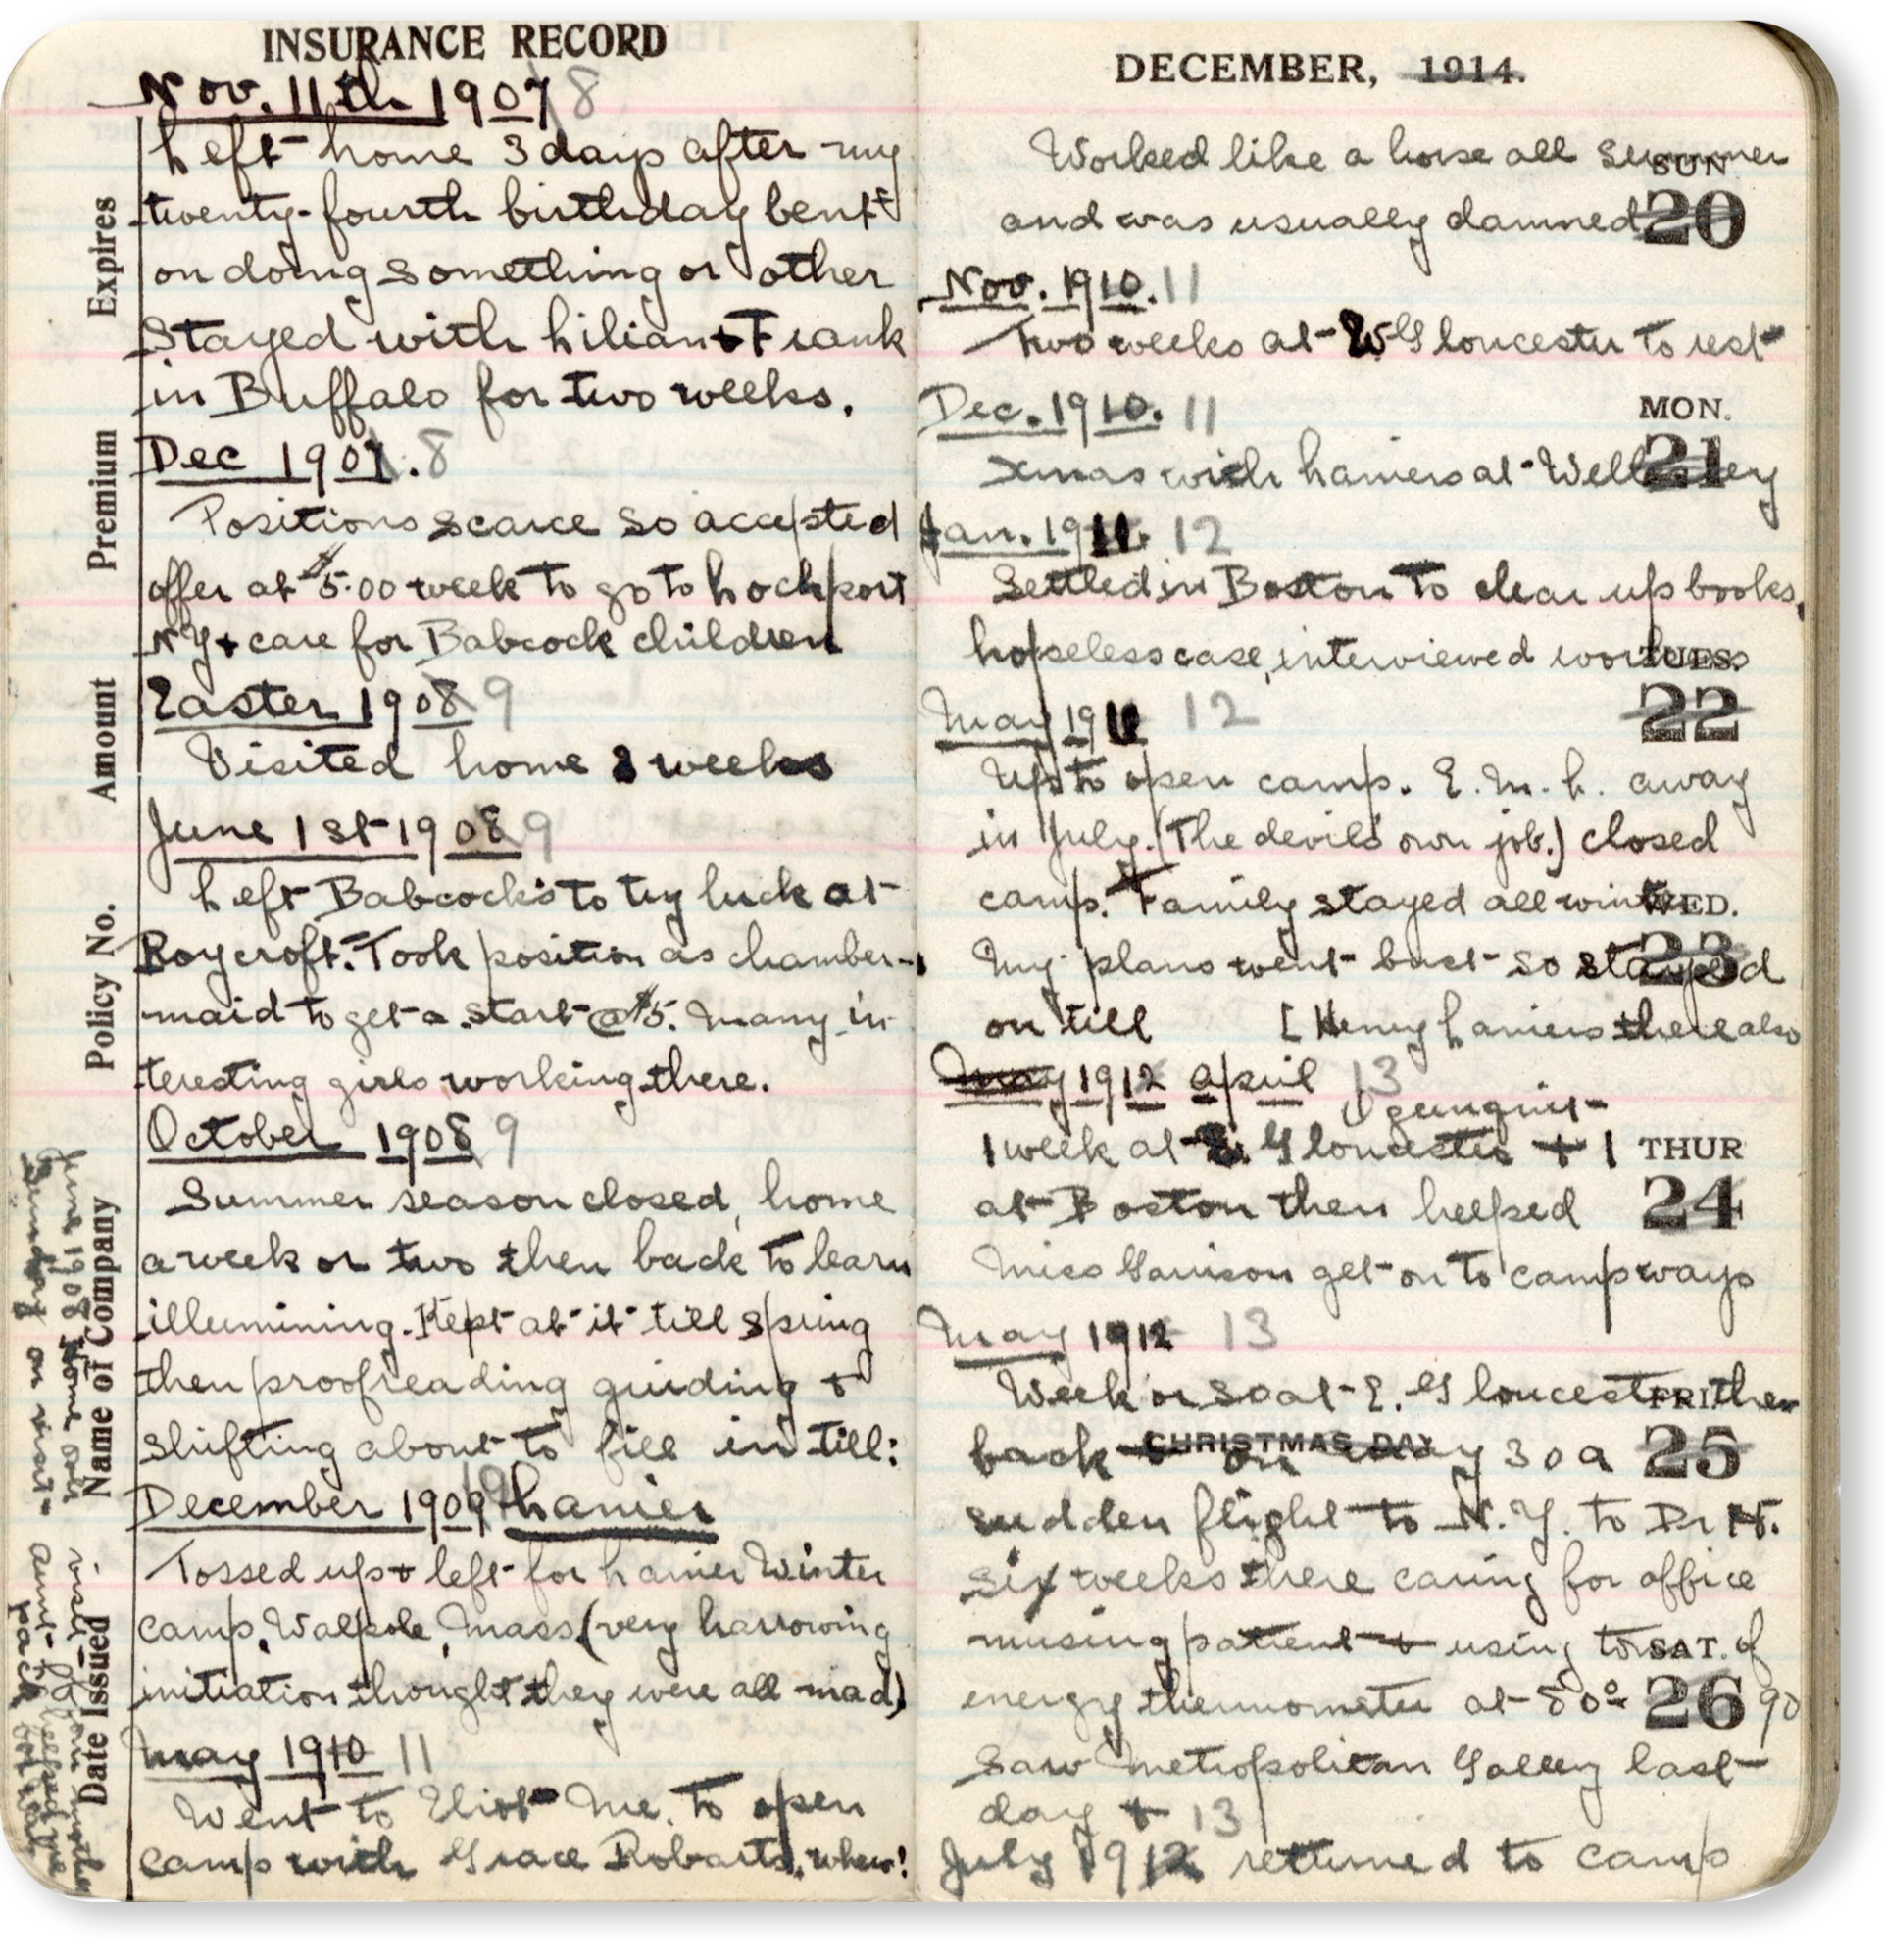 An image of Watkins's diary with handwritten text over two pages